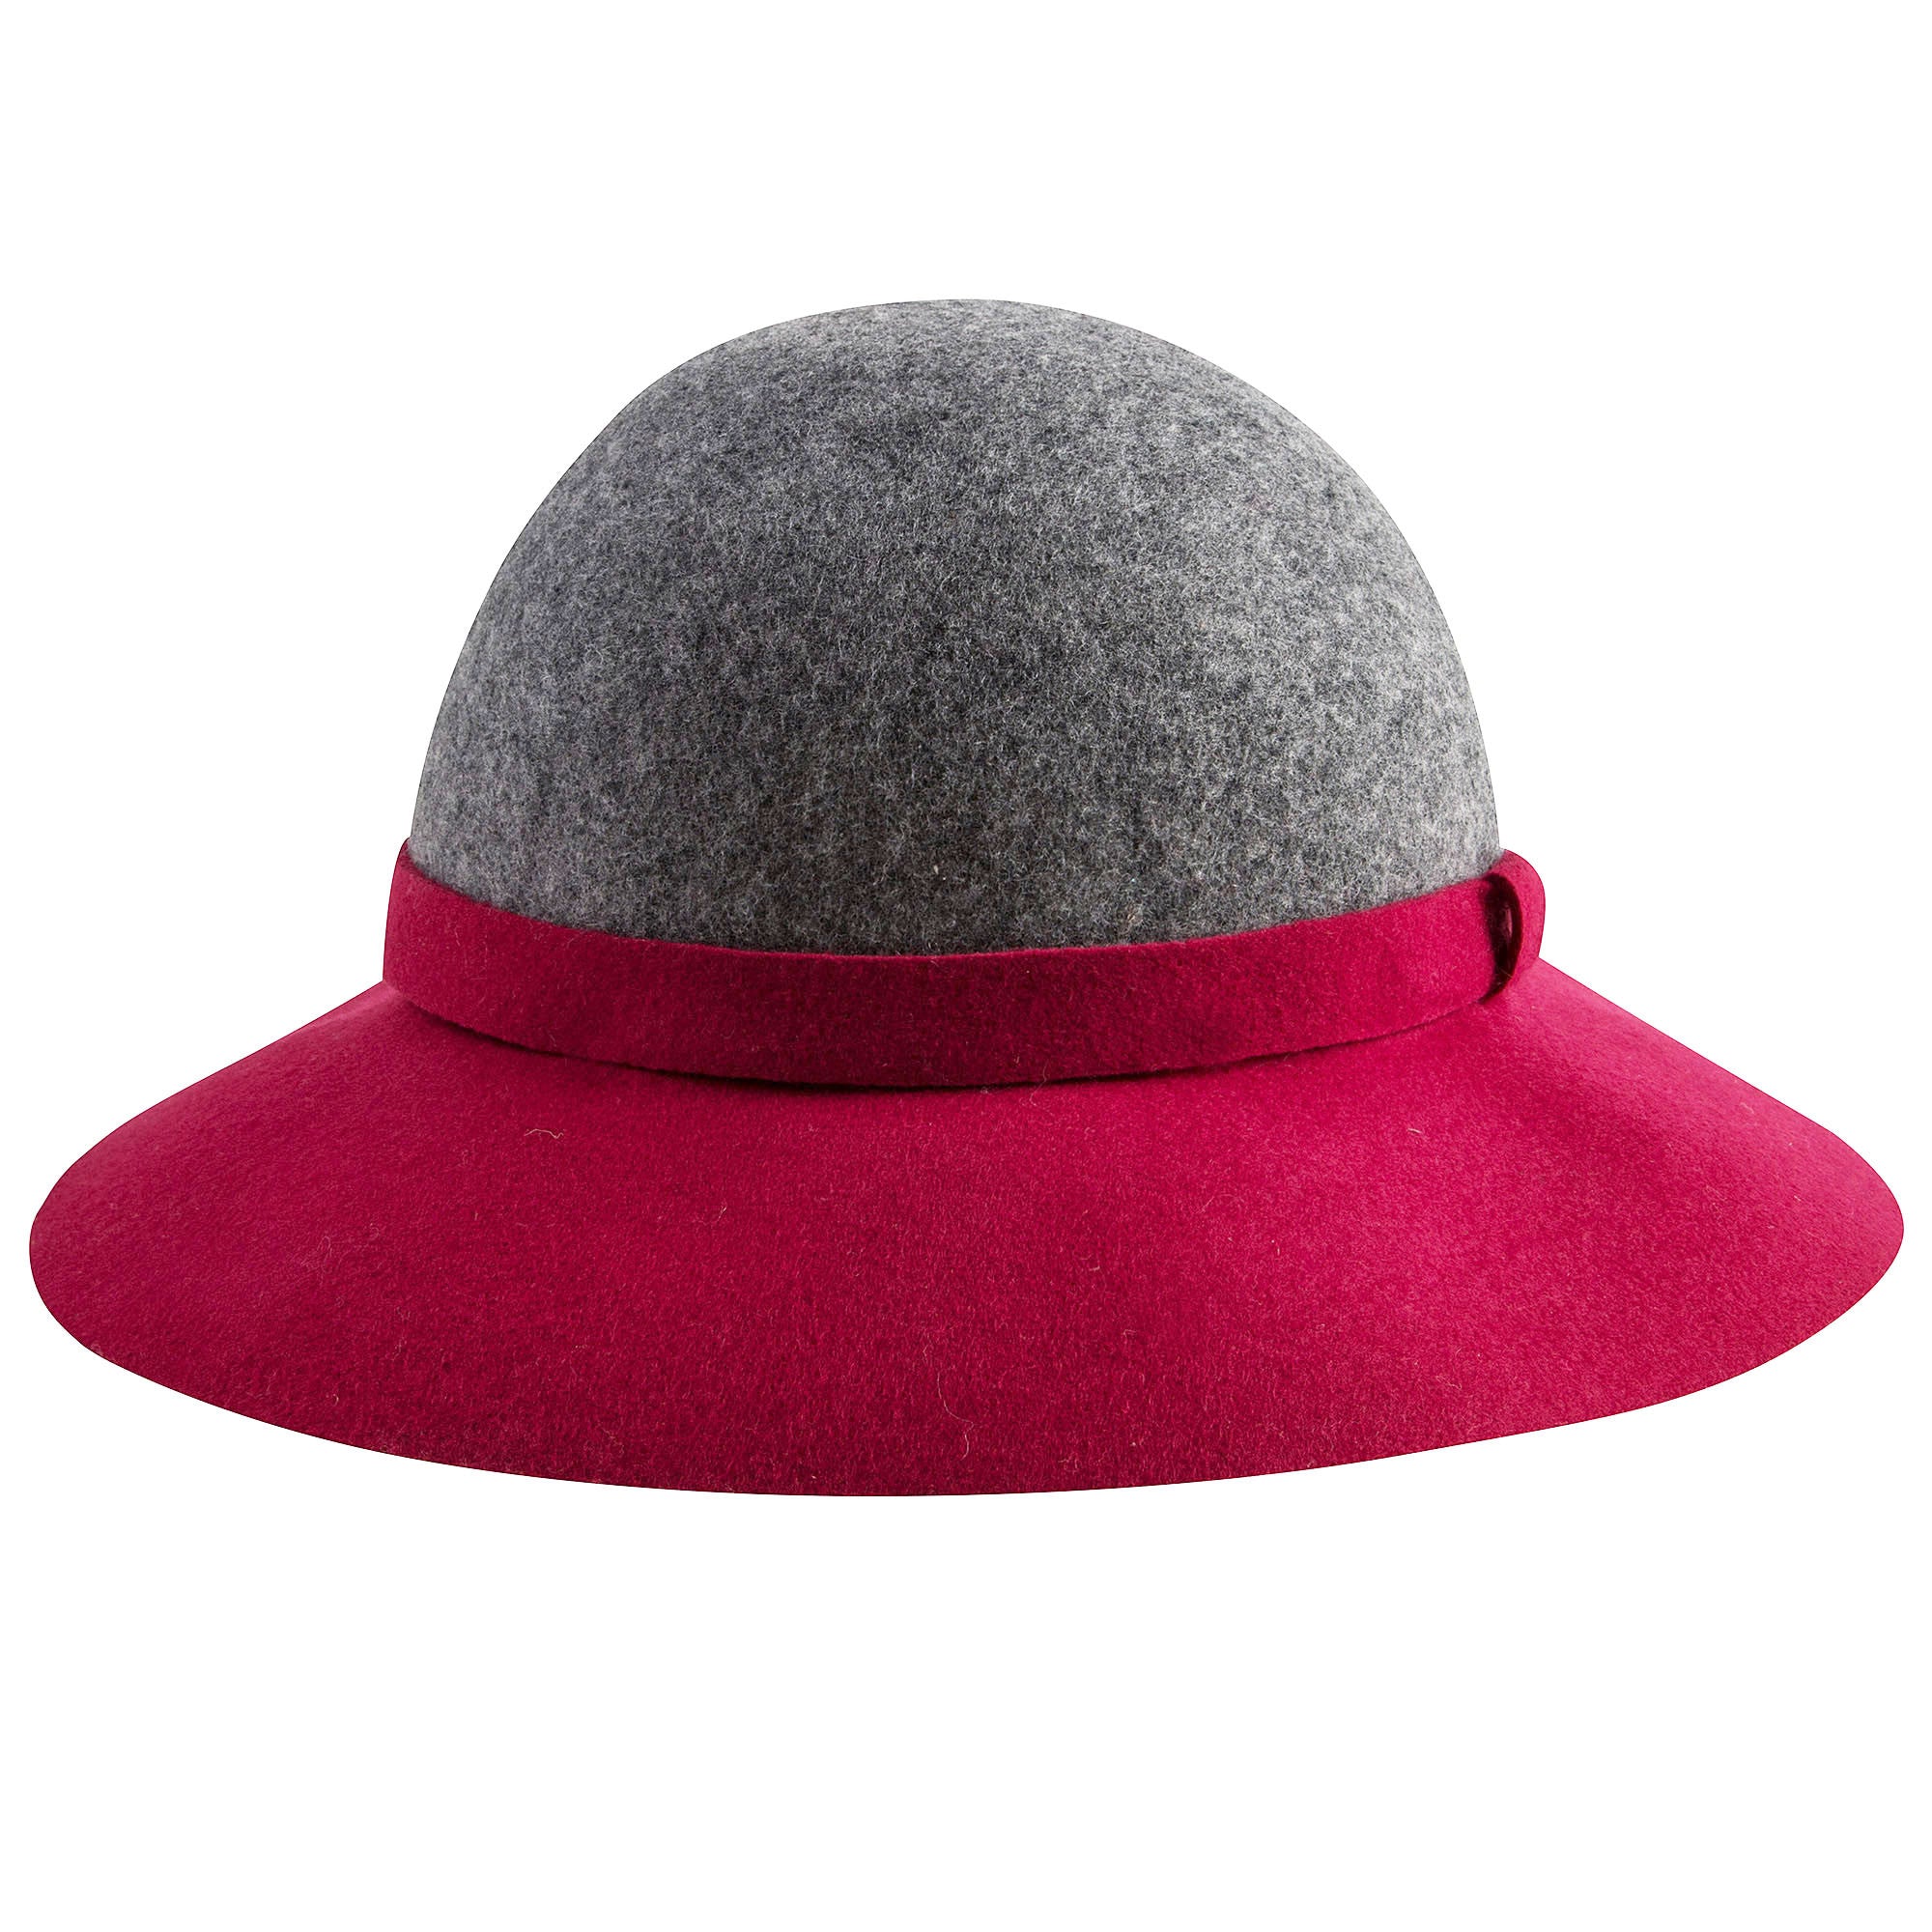 Girls Grey & Red Hat With Bow